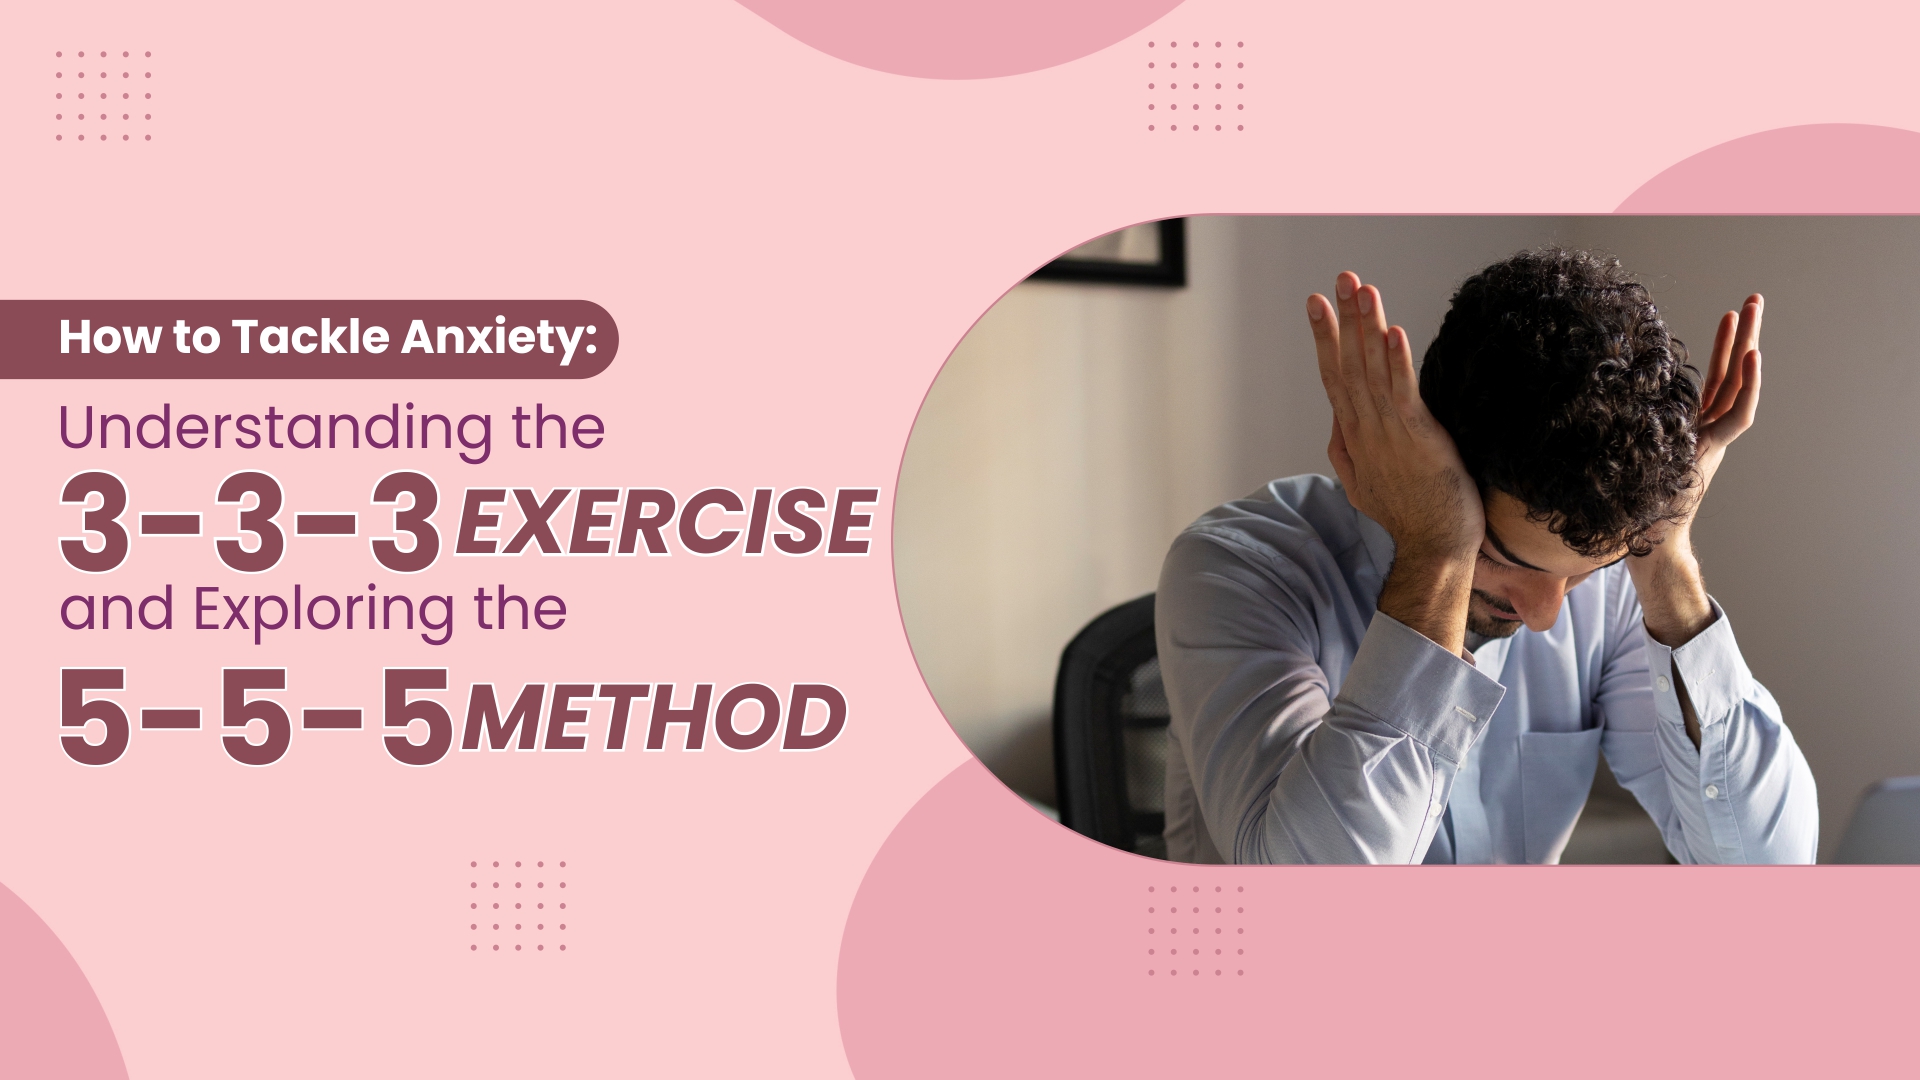 How to Tackle Anxiety: Understanding the 3-3-3 Exercise and Exploring the 5-5-5 Method